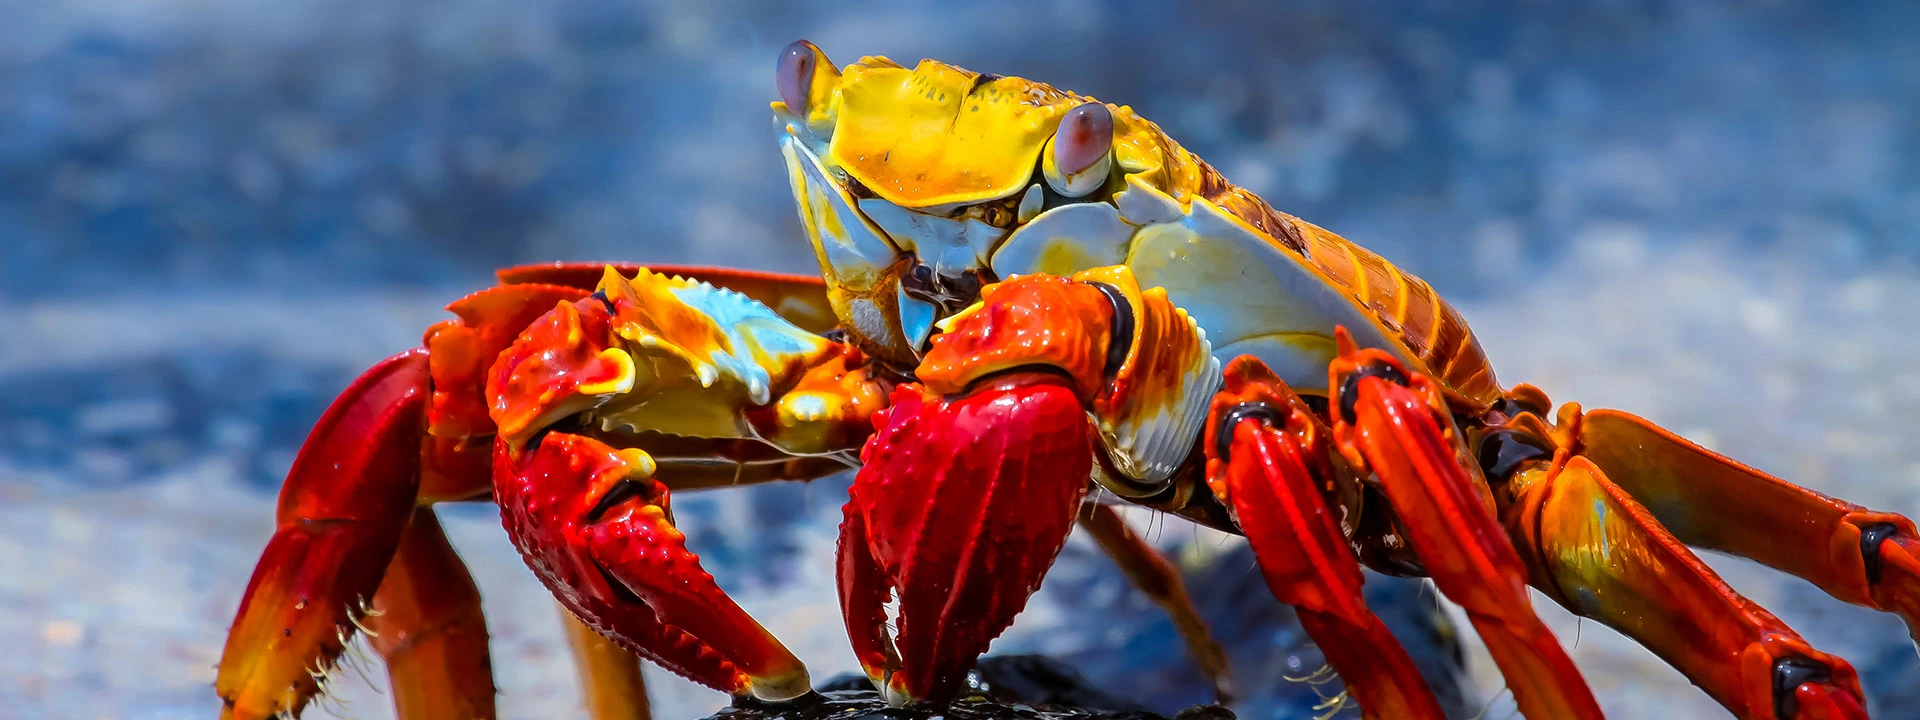 sally lightfoot crab on the beaches in the Galapagos